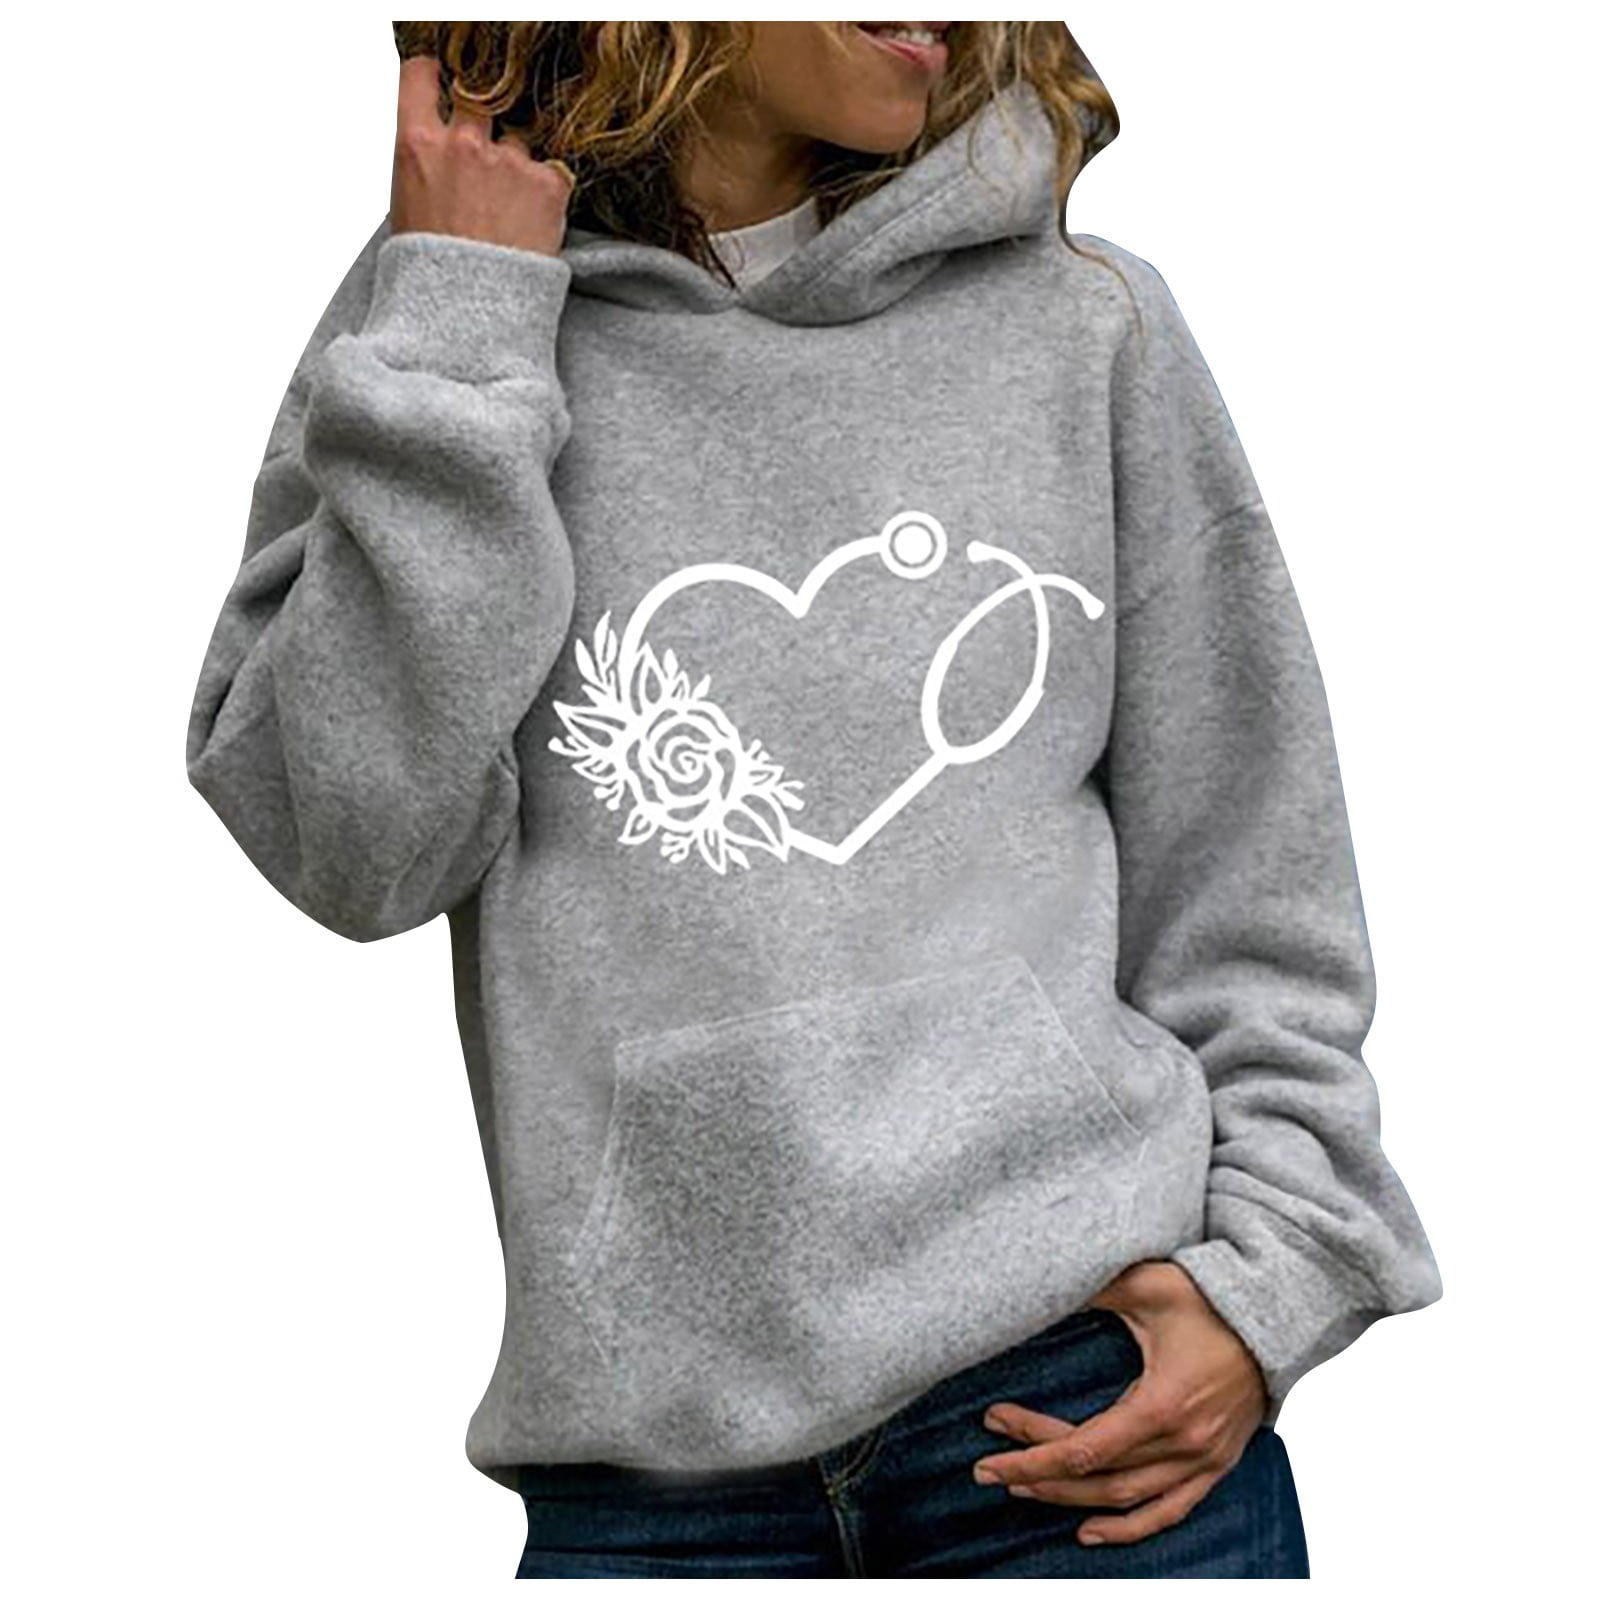 HAPIMO Discount Sweatshirt for Women Pocket Pullover Tops Flower Heart  Graphic Print Long Sleeve Relaxed Fit Womens Hoodie Sweatshirt Teen Girls  Clothes Gray M 